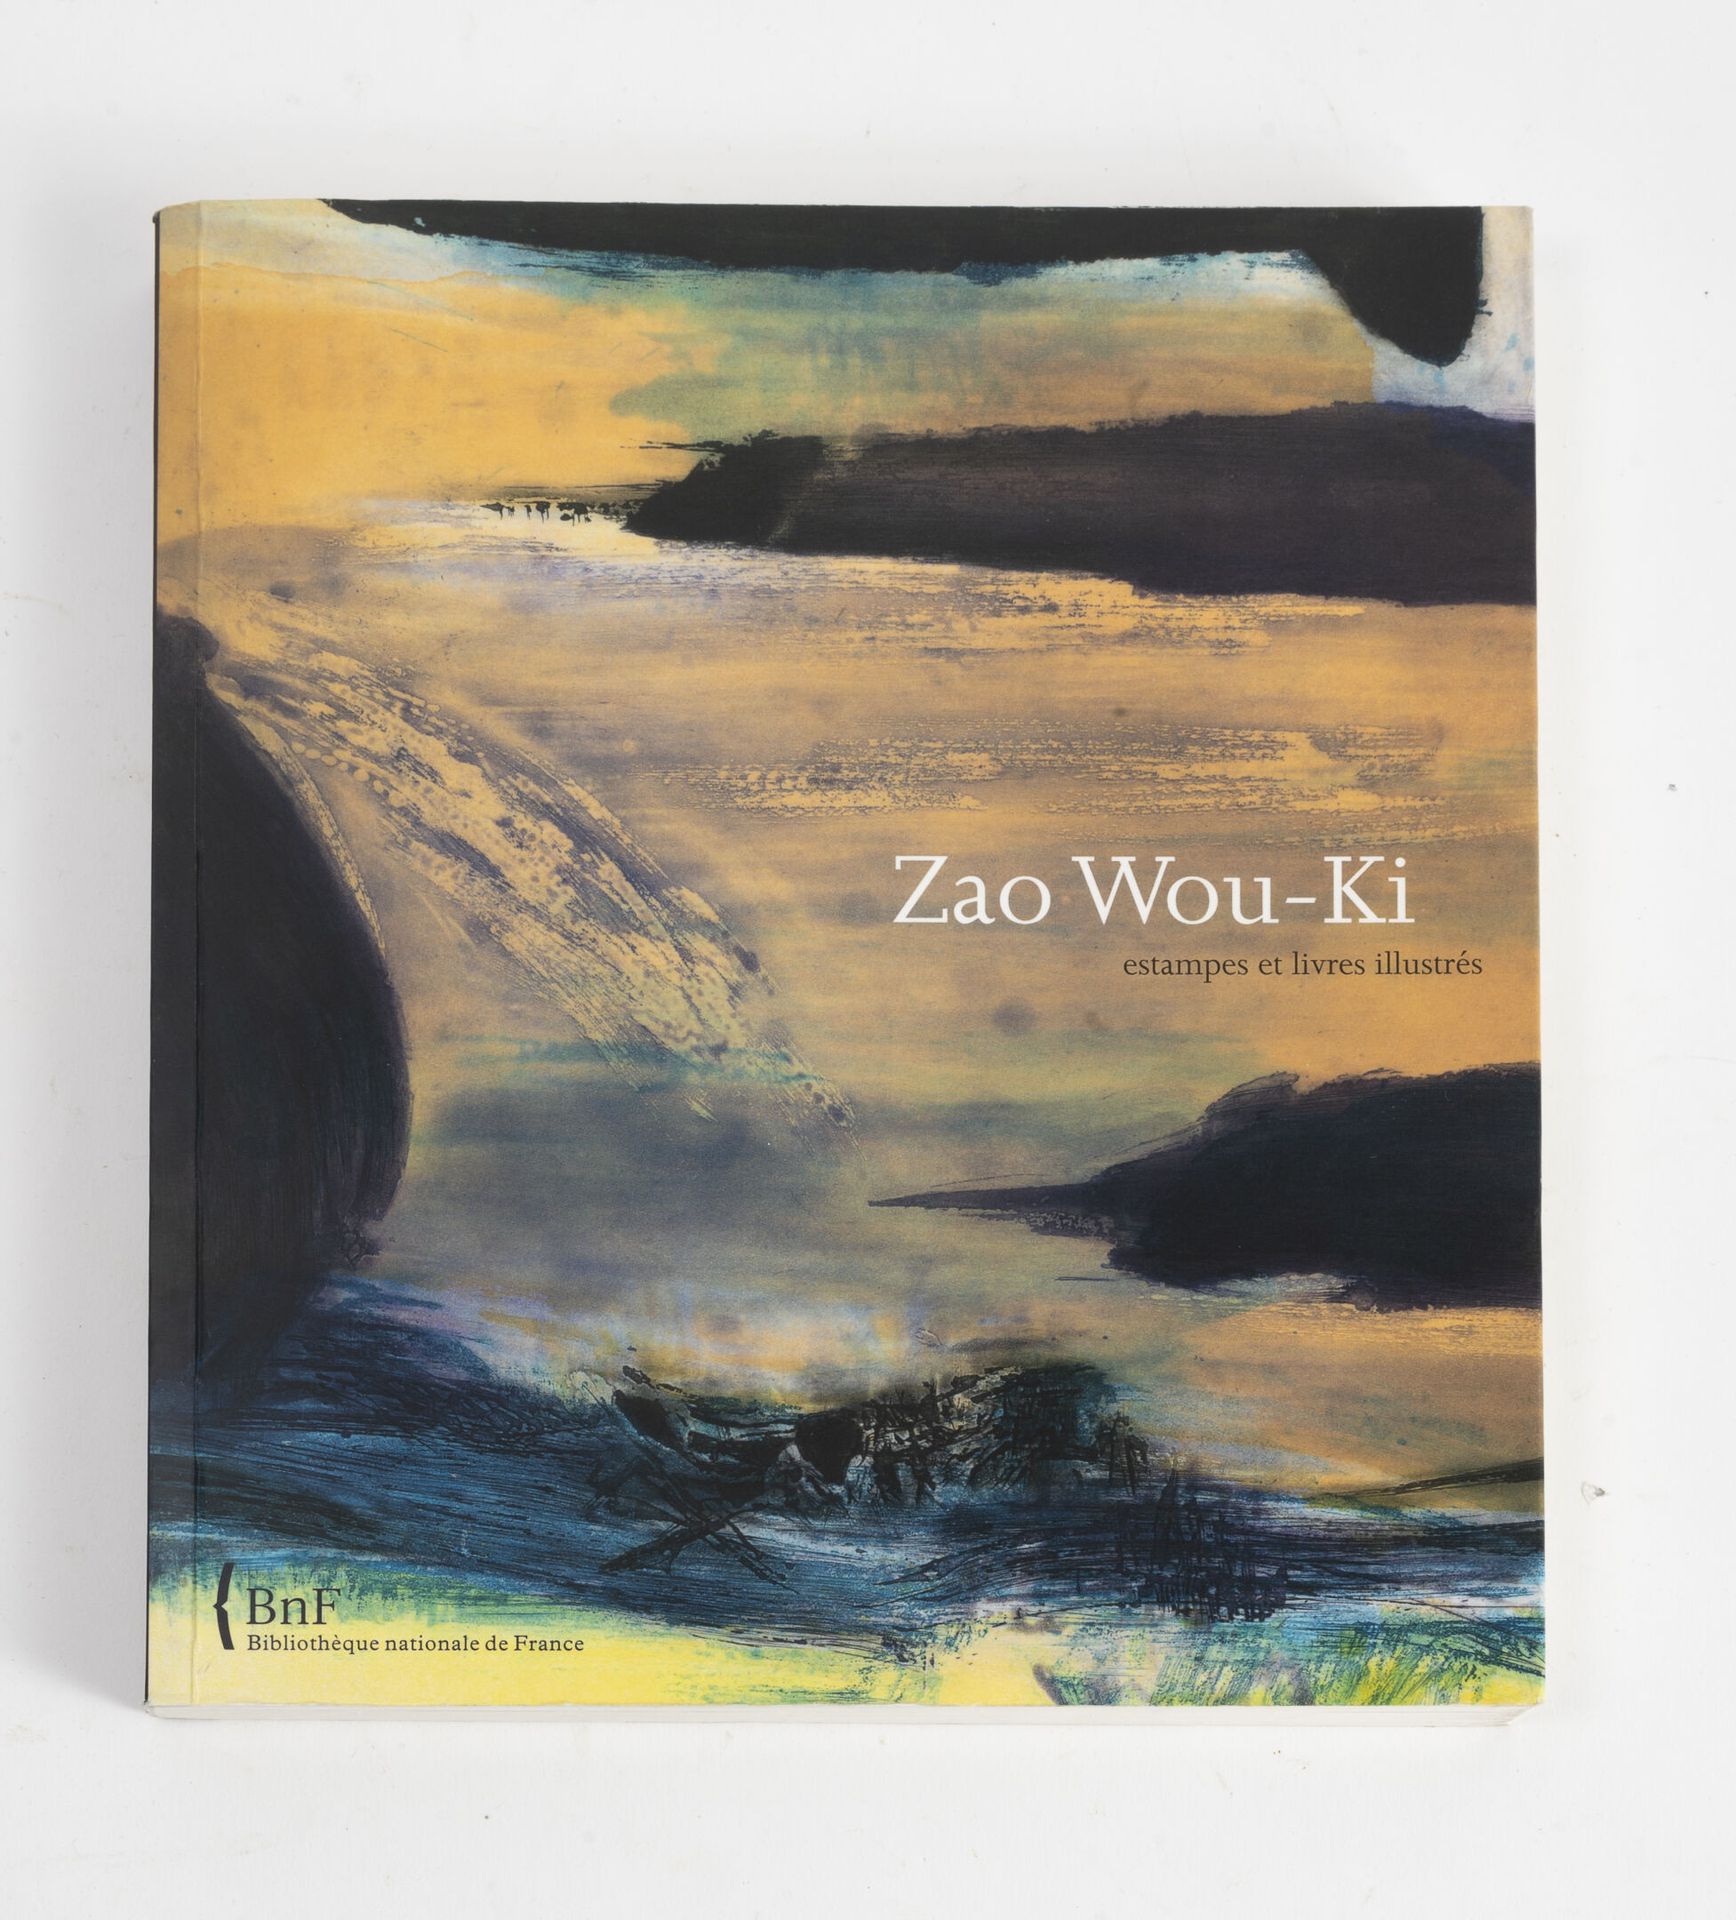 COLLECTIF Zao Wou-ki, prints and illustrated books.
Catalog of the exhibition at&hellip;